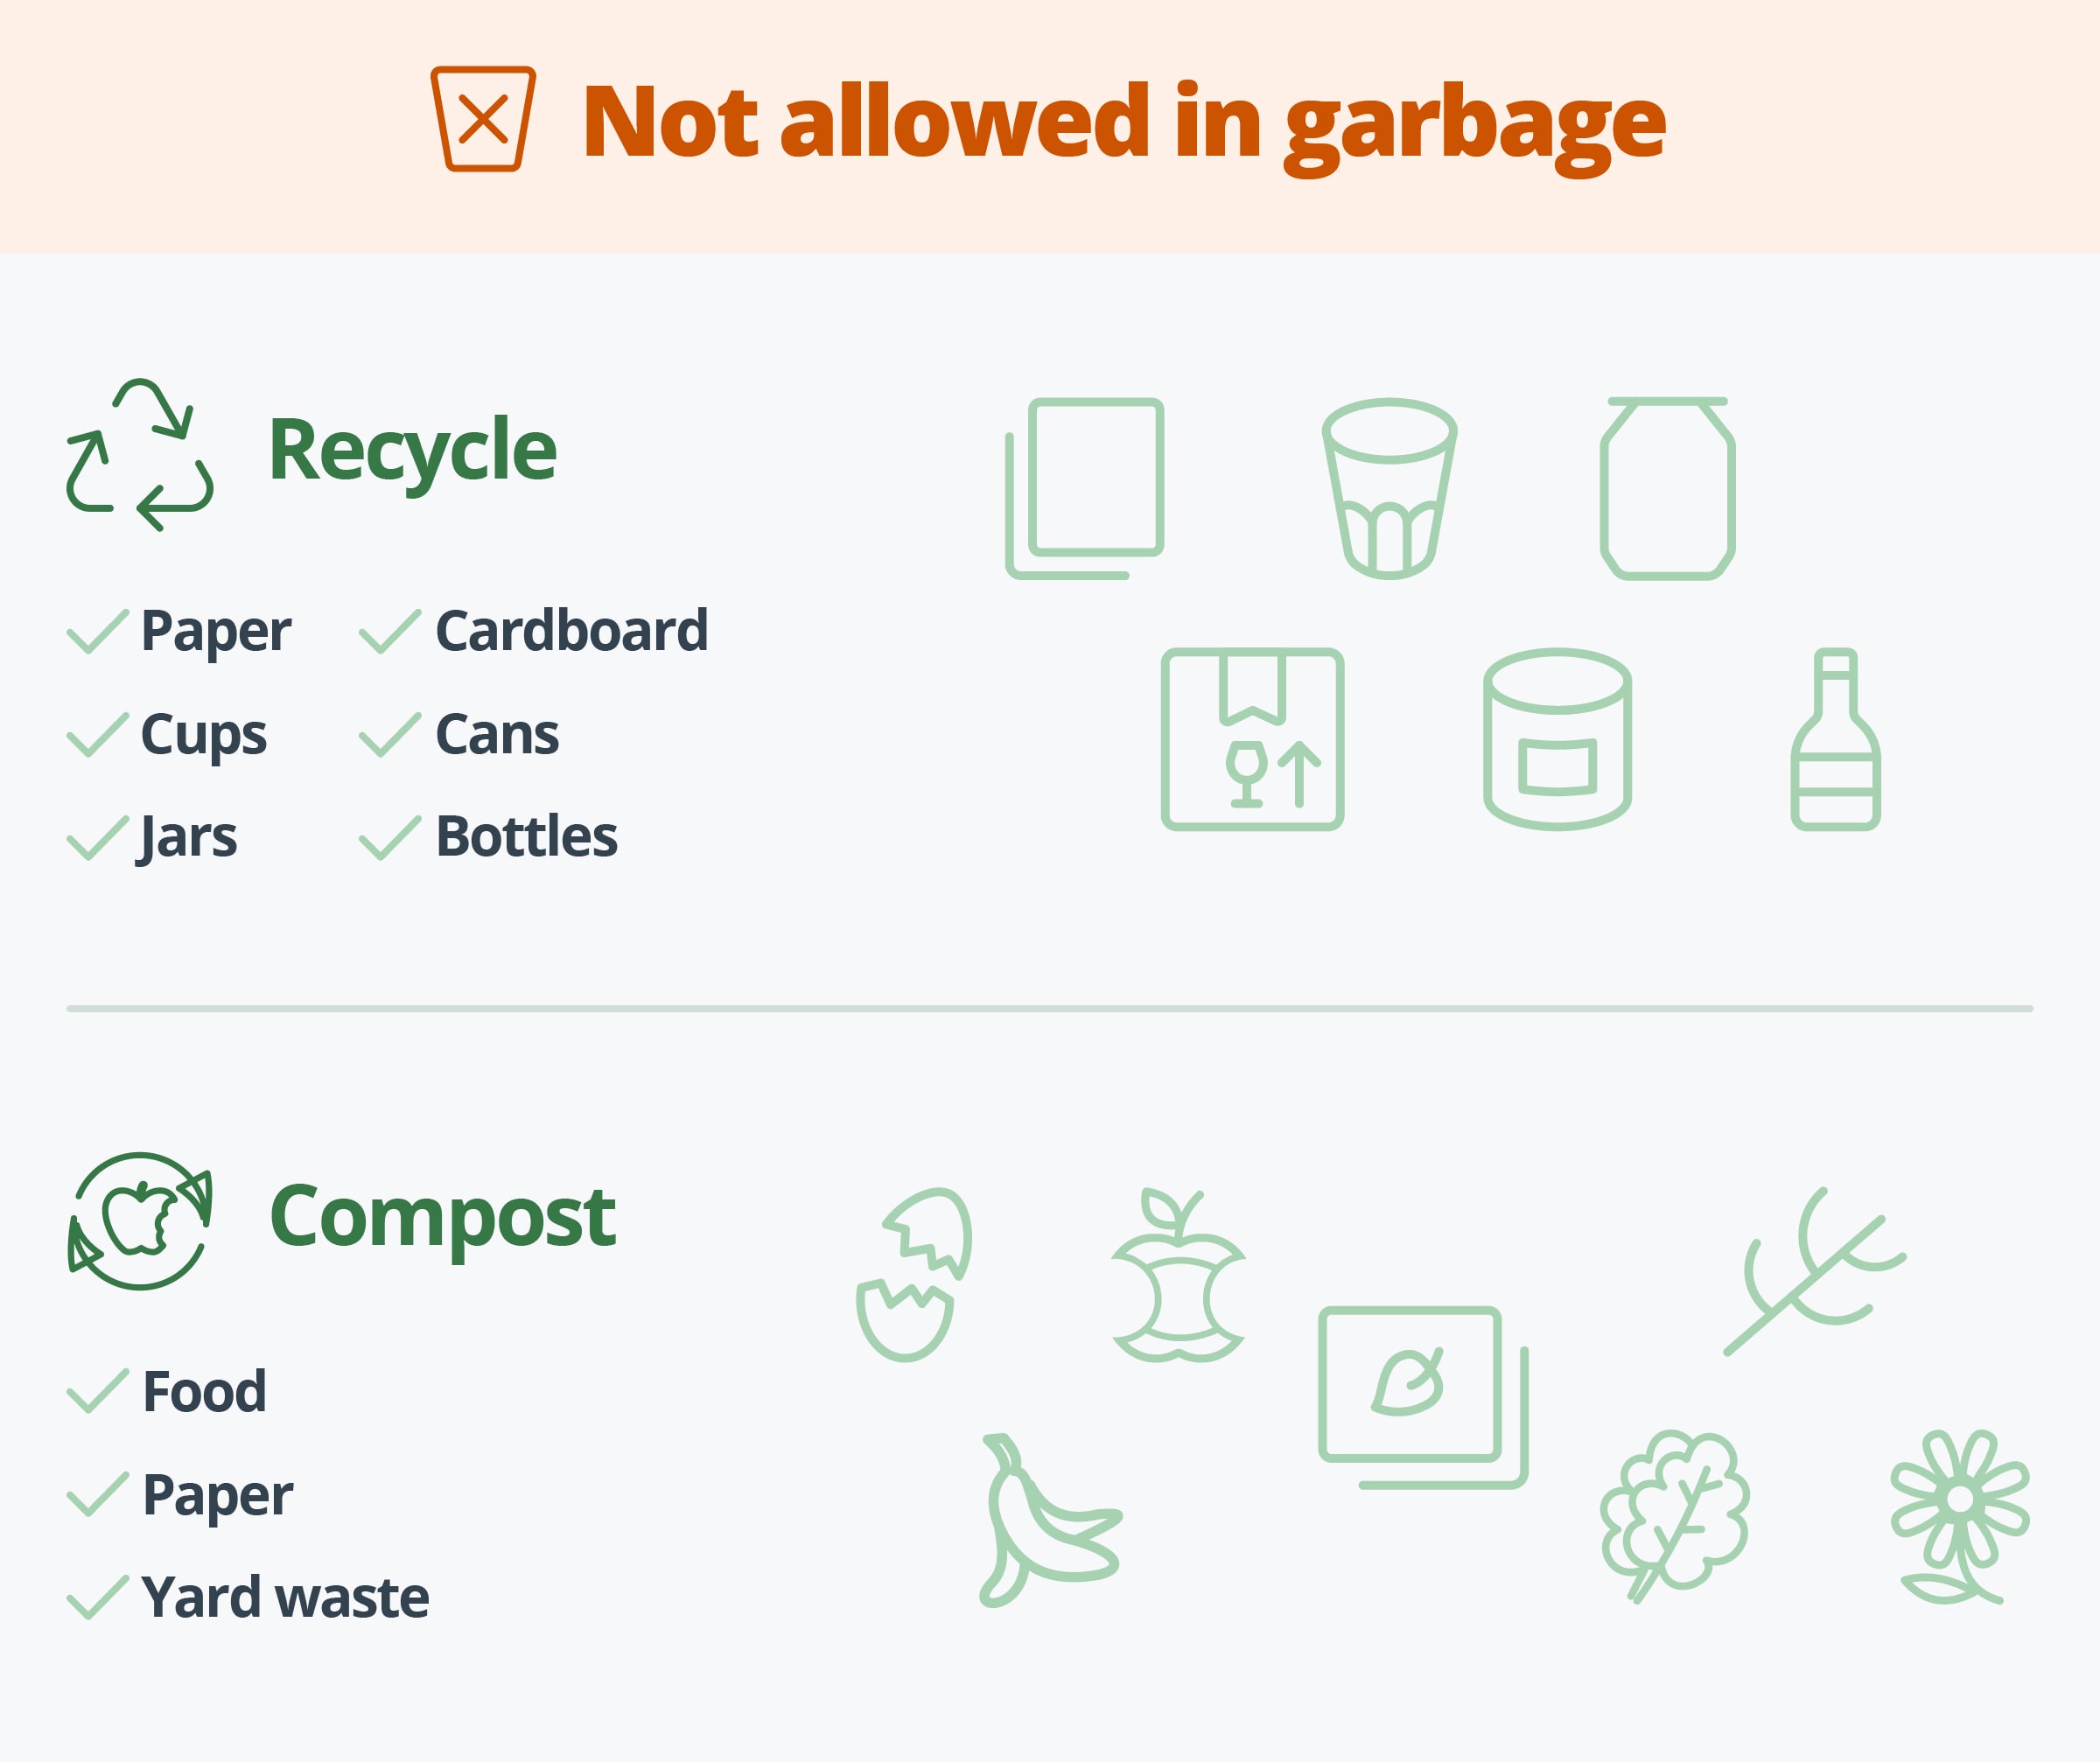 Recycle and Compost